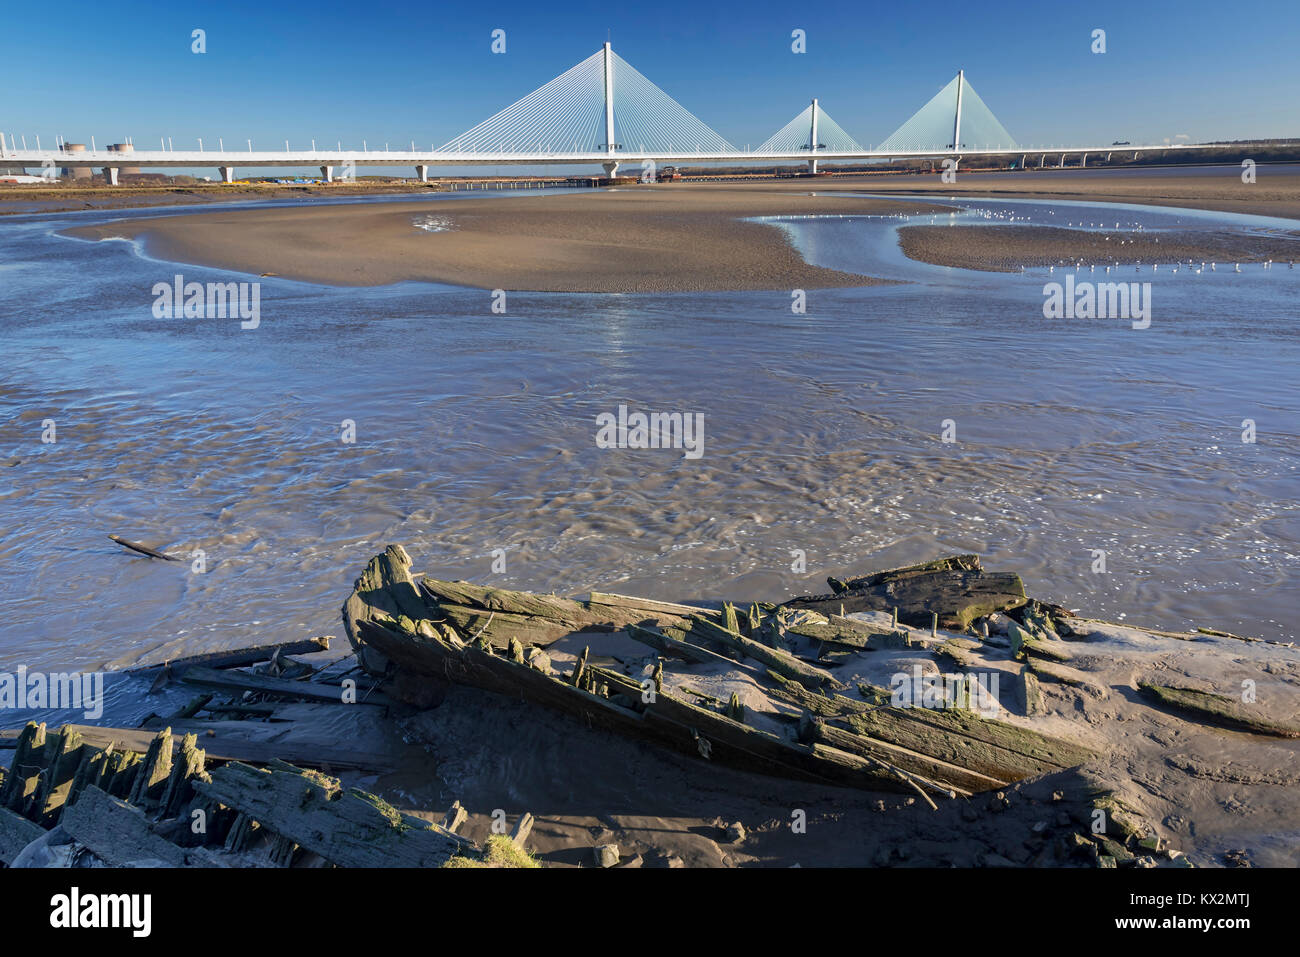 Gateway bridge over the river Mersey seen from Widnes to Runcorn with wrecked wooden boat in the mud. Stock Photo